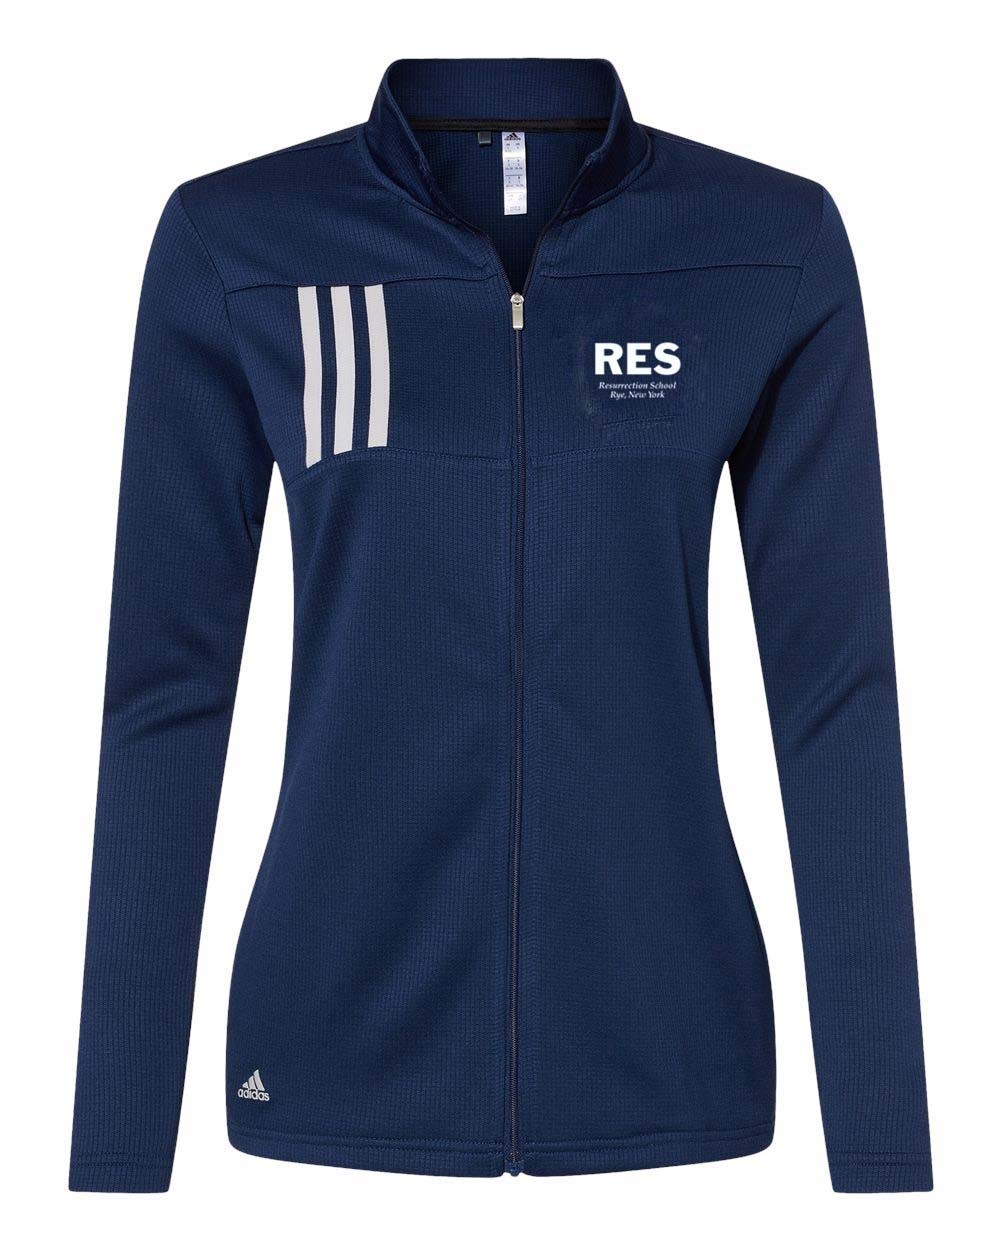 RES Spirit Adidas 3 Stripe Women's Full Zip w/ RES Logo - Please Allow 2-3 Weeks for Delivery